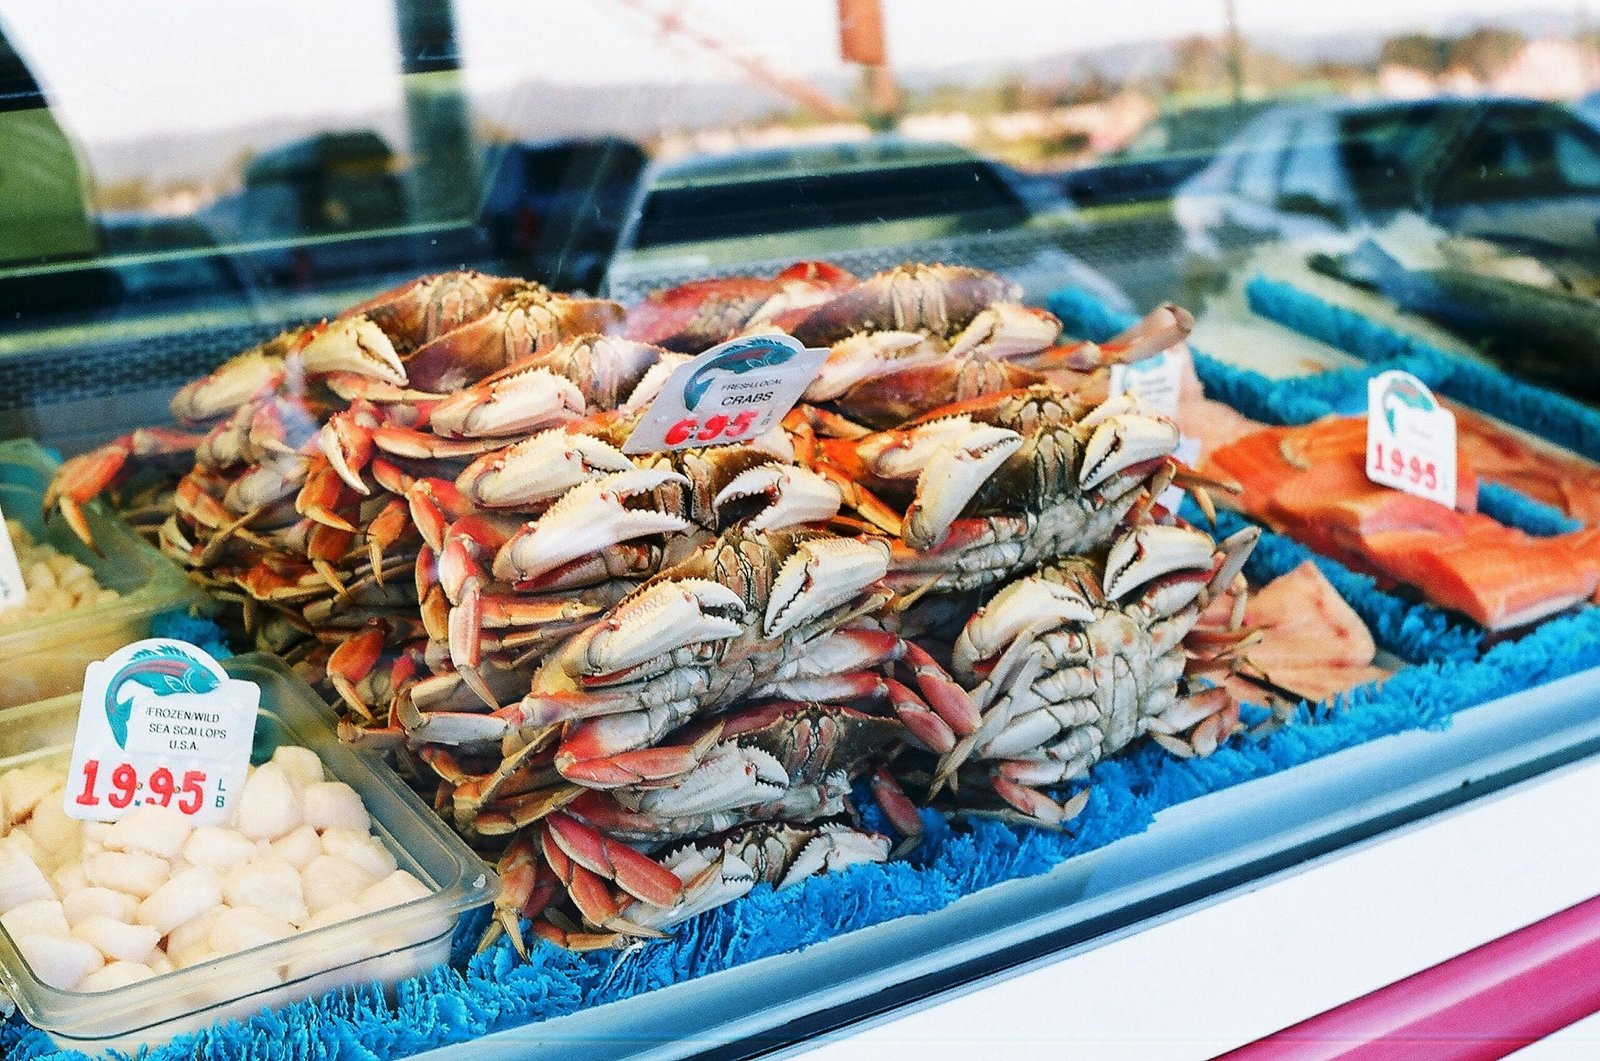 Is Seafood A Trigger For Gout Attacks?